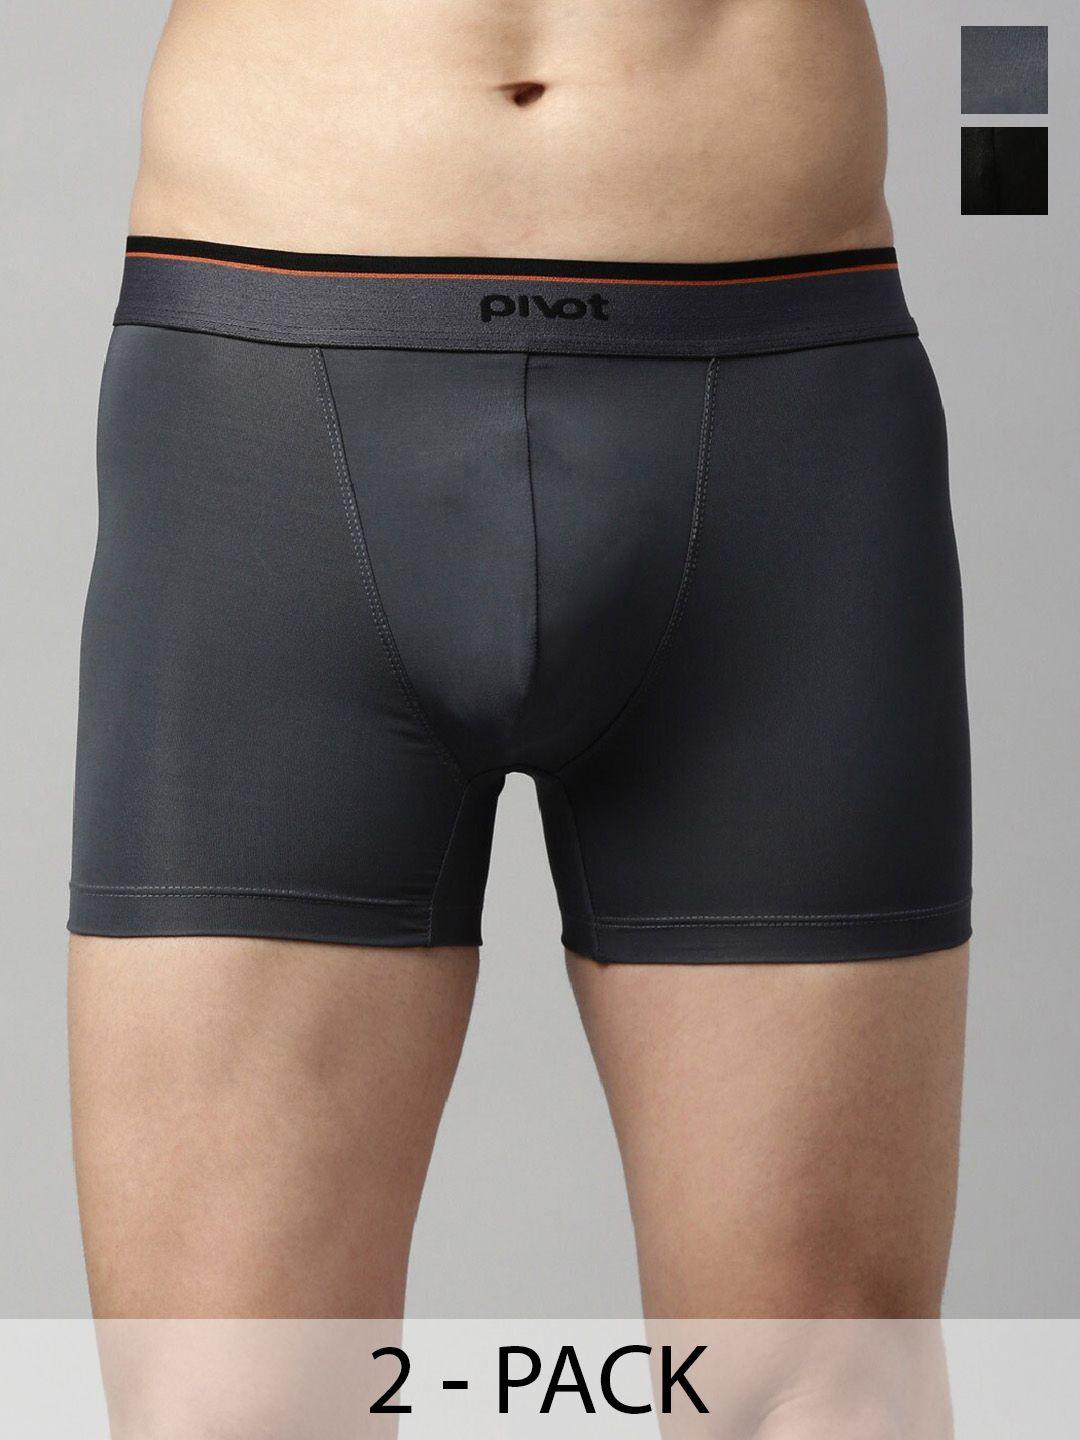 pivot pack of 2 assorted trunks